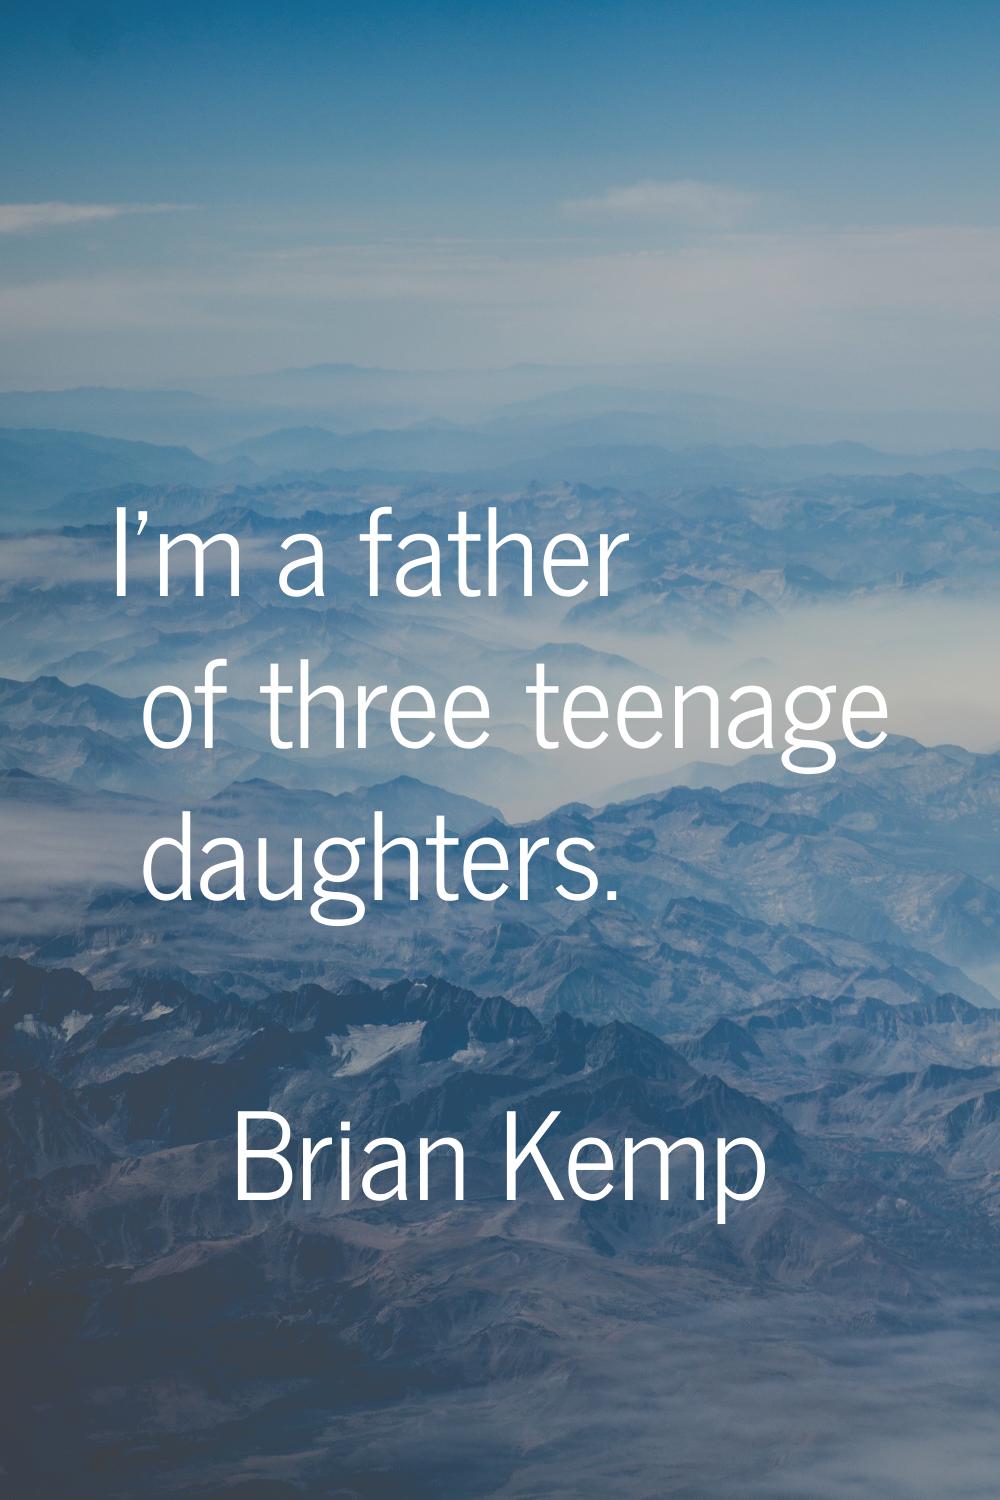 I'm a father of three teenage daughters.